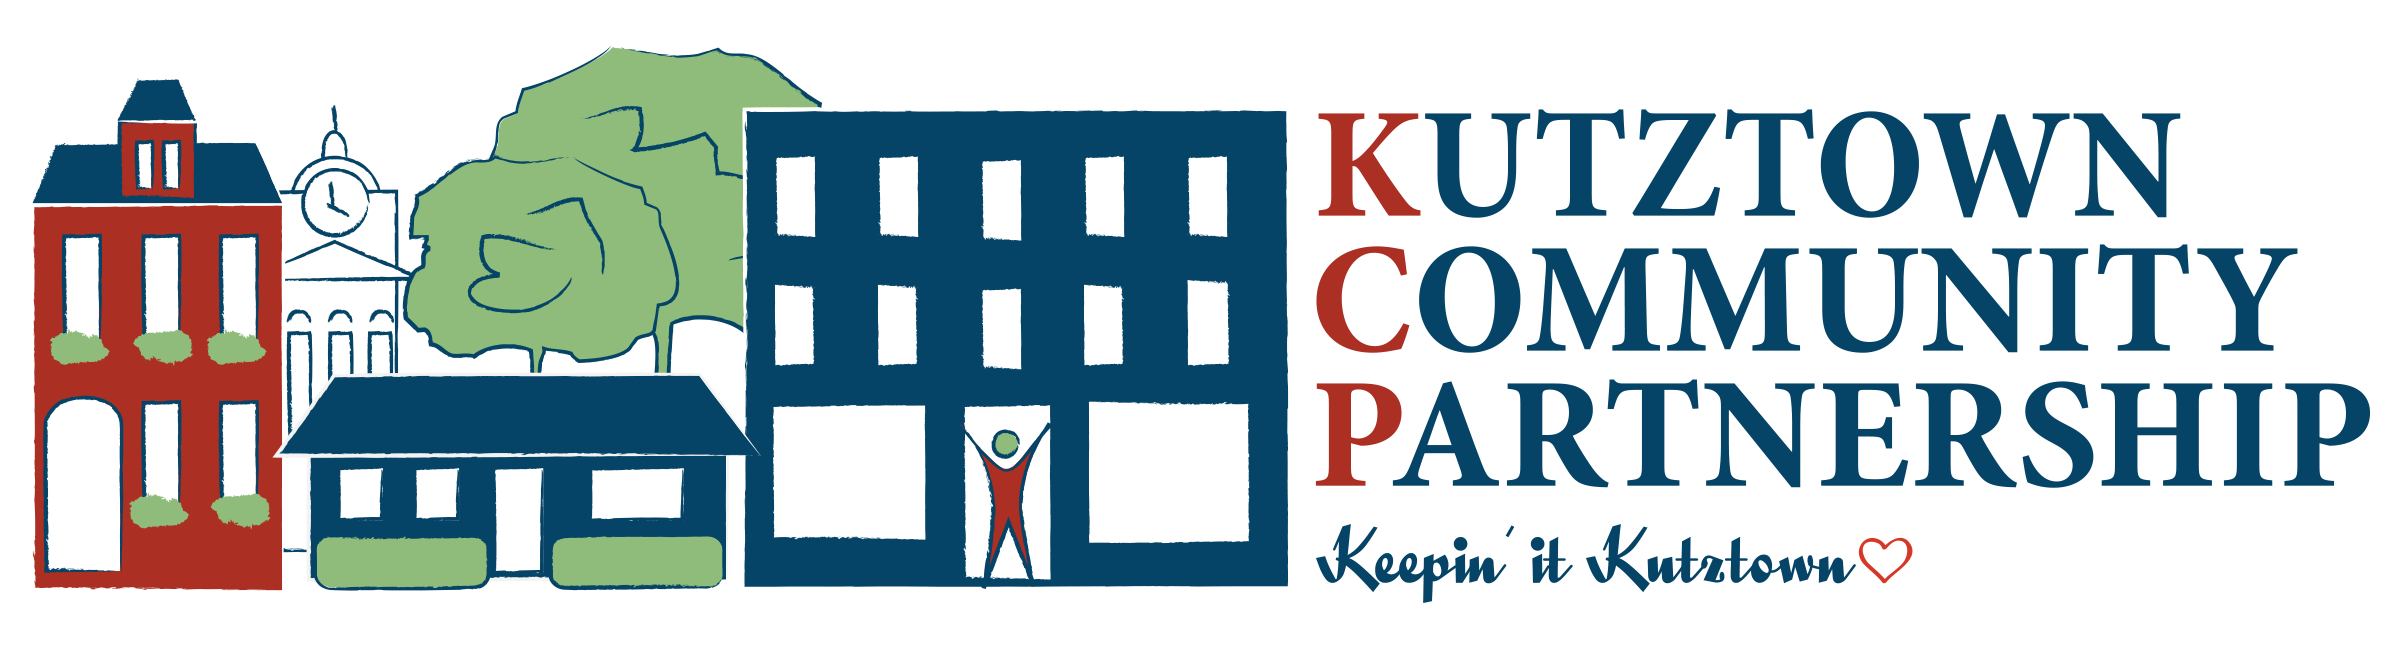 KCP logo, depictions of buildings, trees at the KU clock tower, aside the text "Kutztown Community Partnership, Keepin it Kutztown"